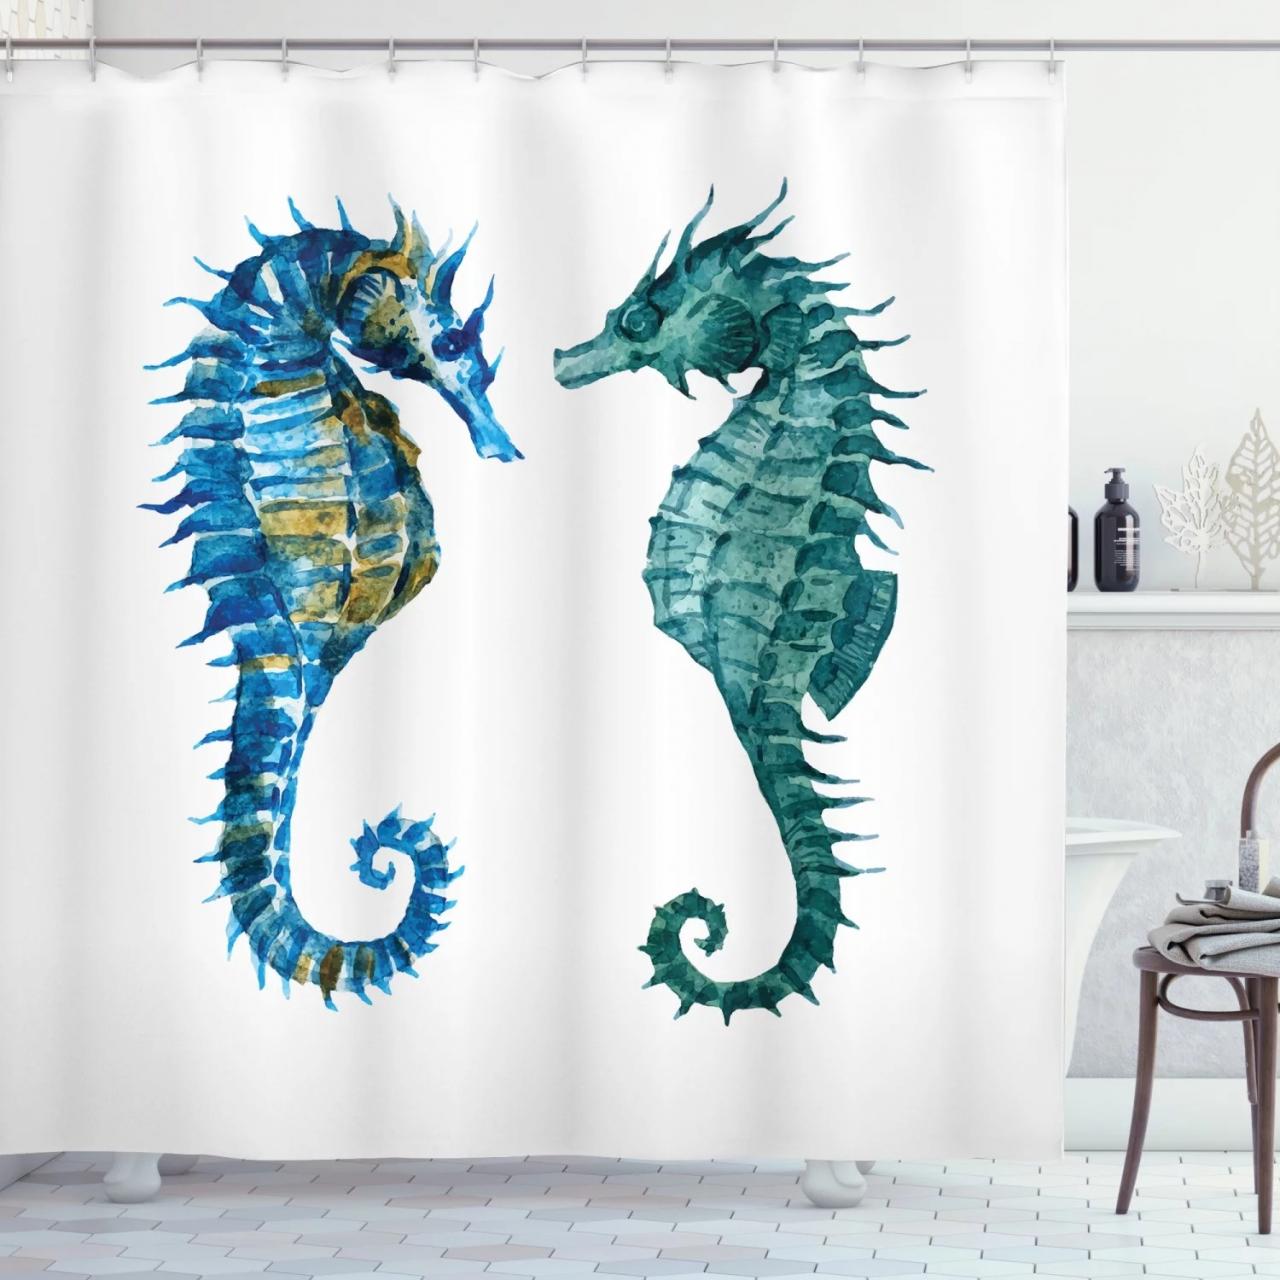 Seahorse Shower Curtain, Watercolor Inspired Retro Artwork of Two